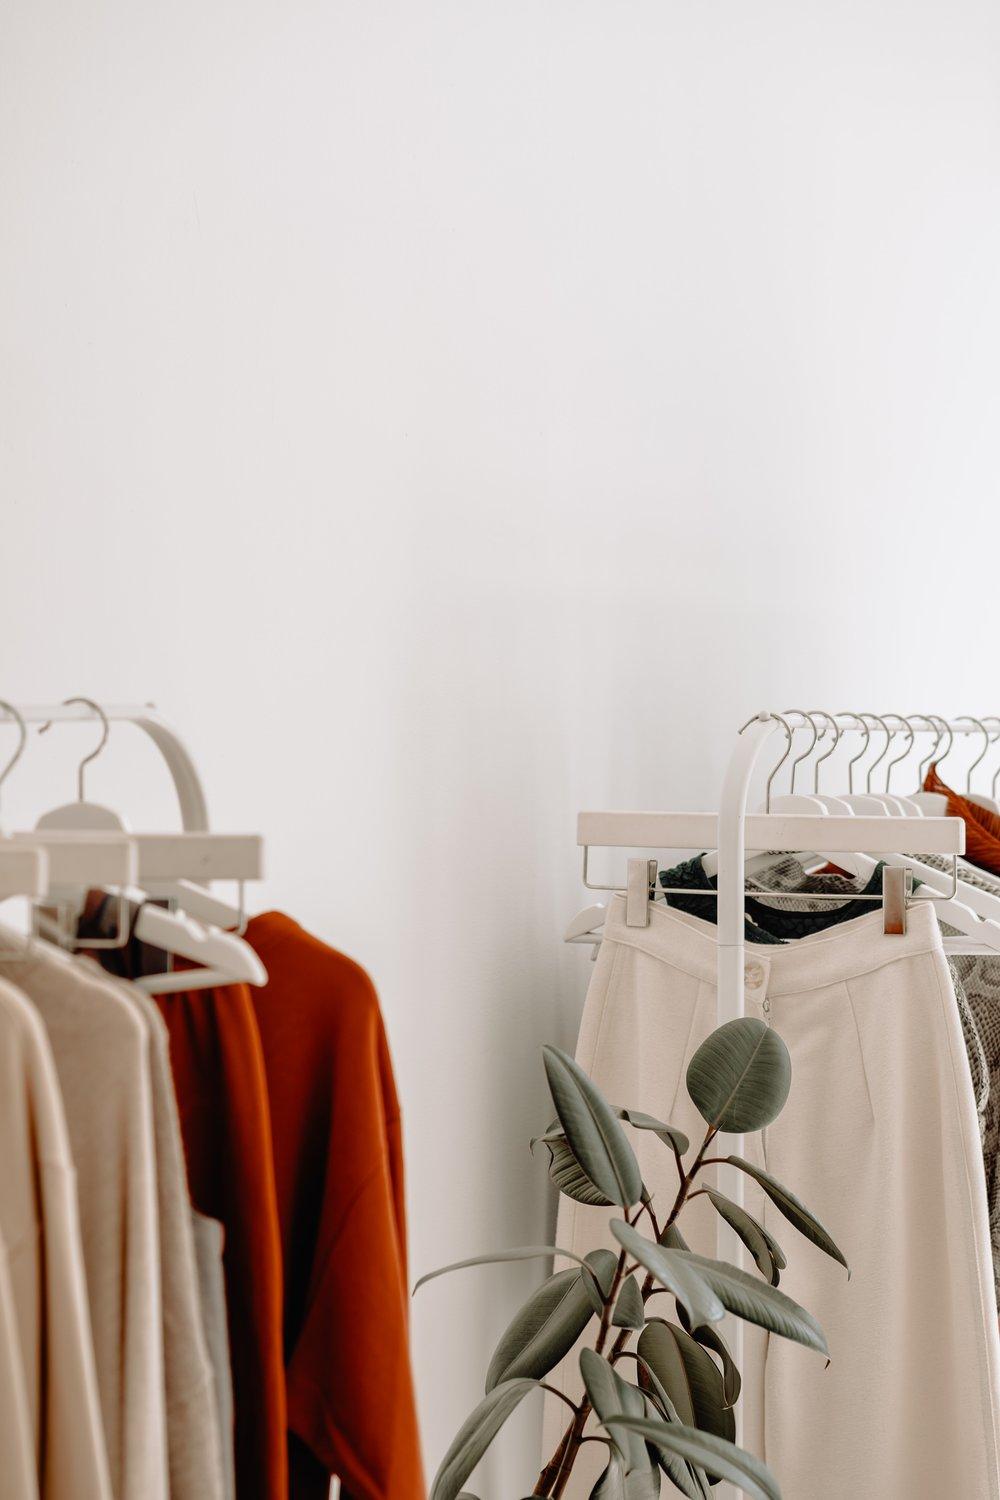 The Beginner's Guide To Sustainable Fashion